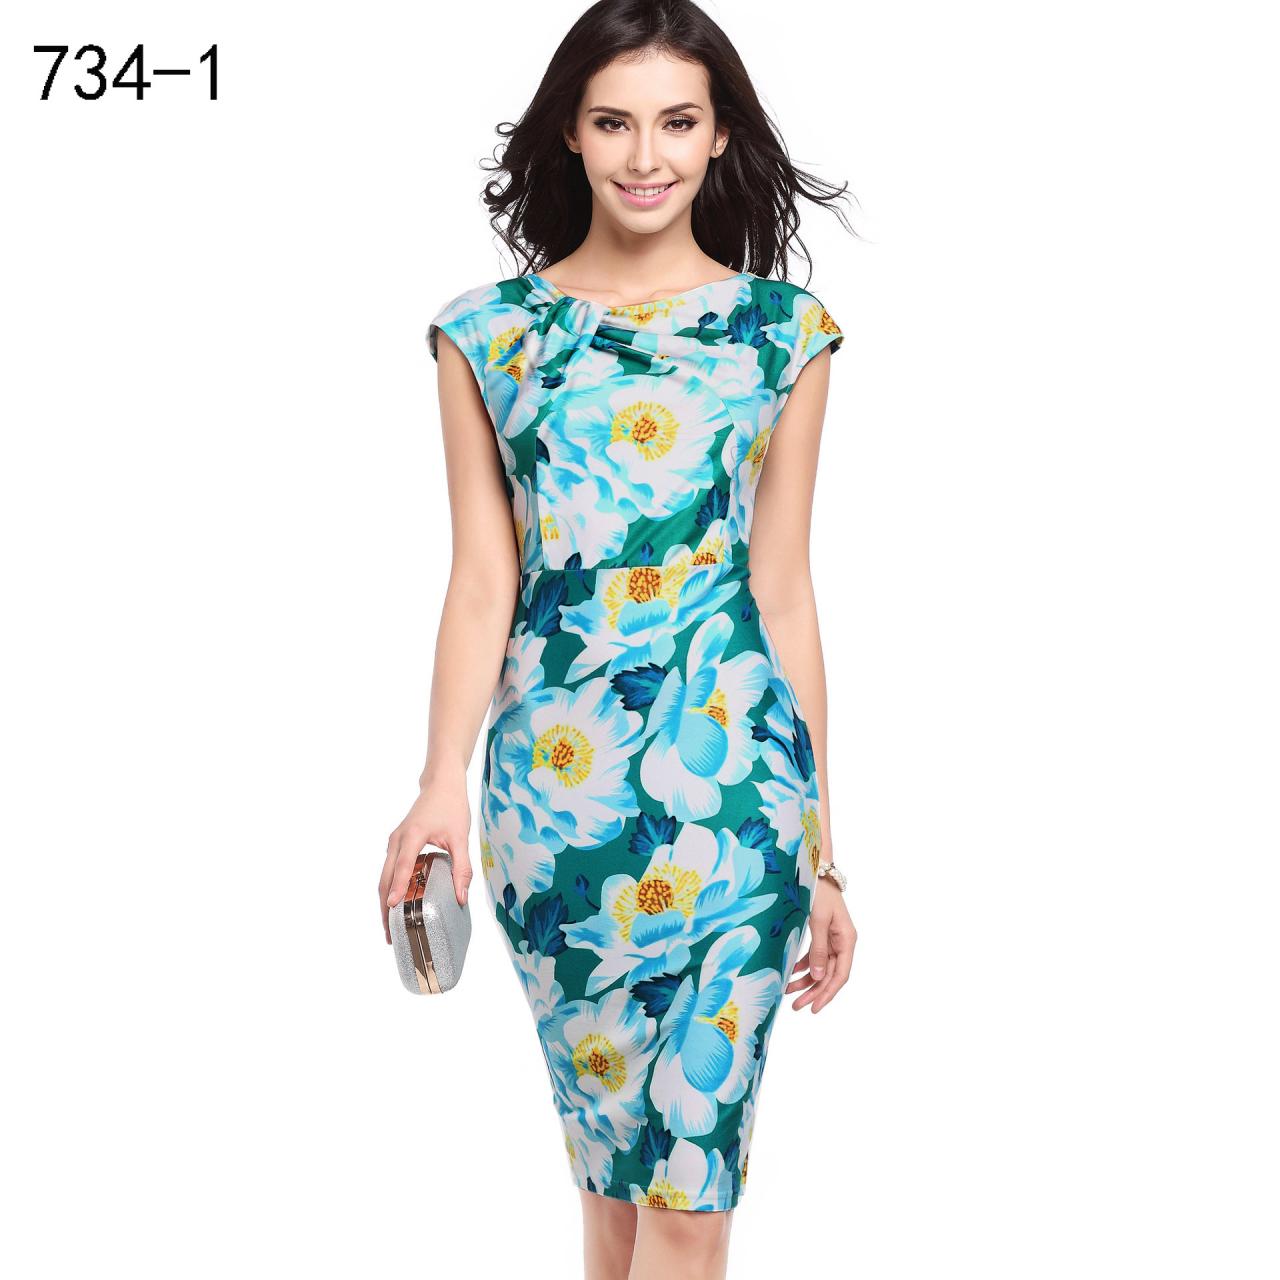 Women Floral Printed Pencil Dress Cap Sleeve Slim Bodycon Work Office Party Dress 734-1#